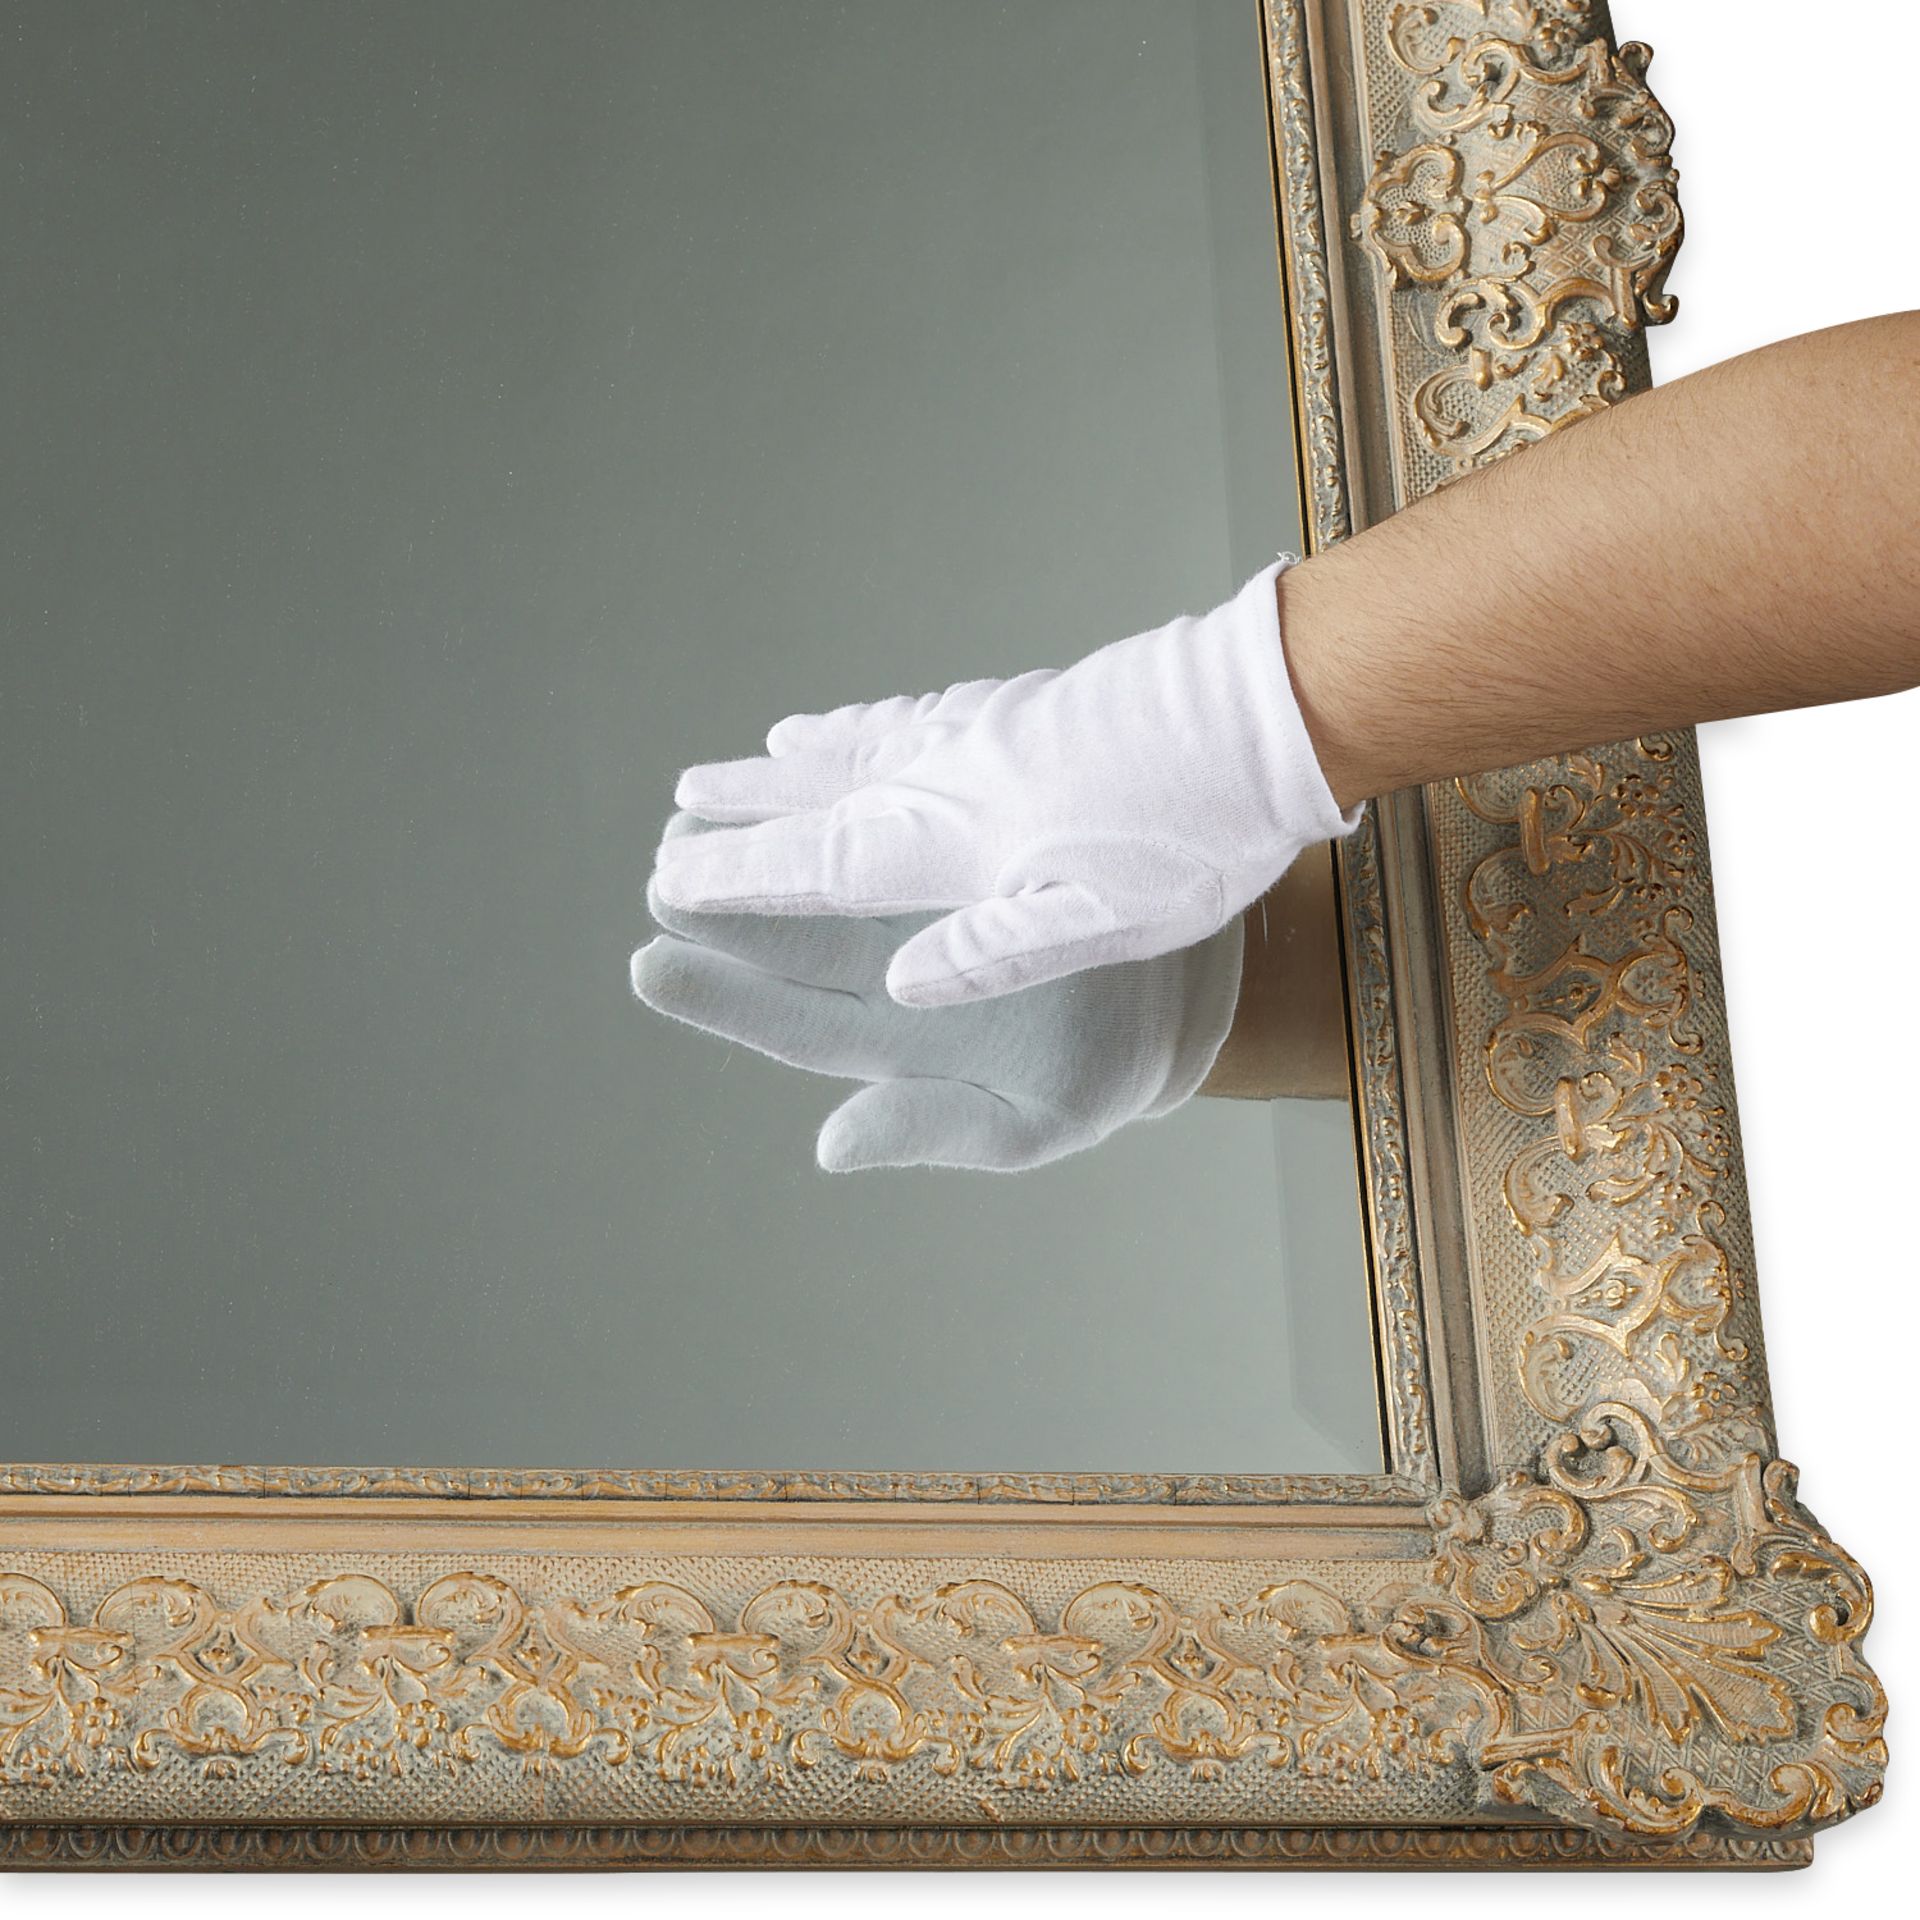 Early 20th c. Frame with Modern Mirror - Image 2 of 6